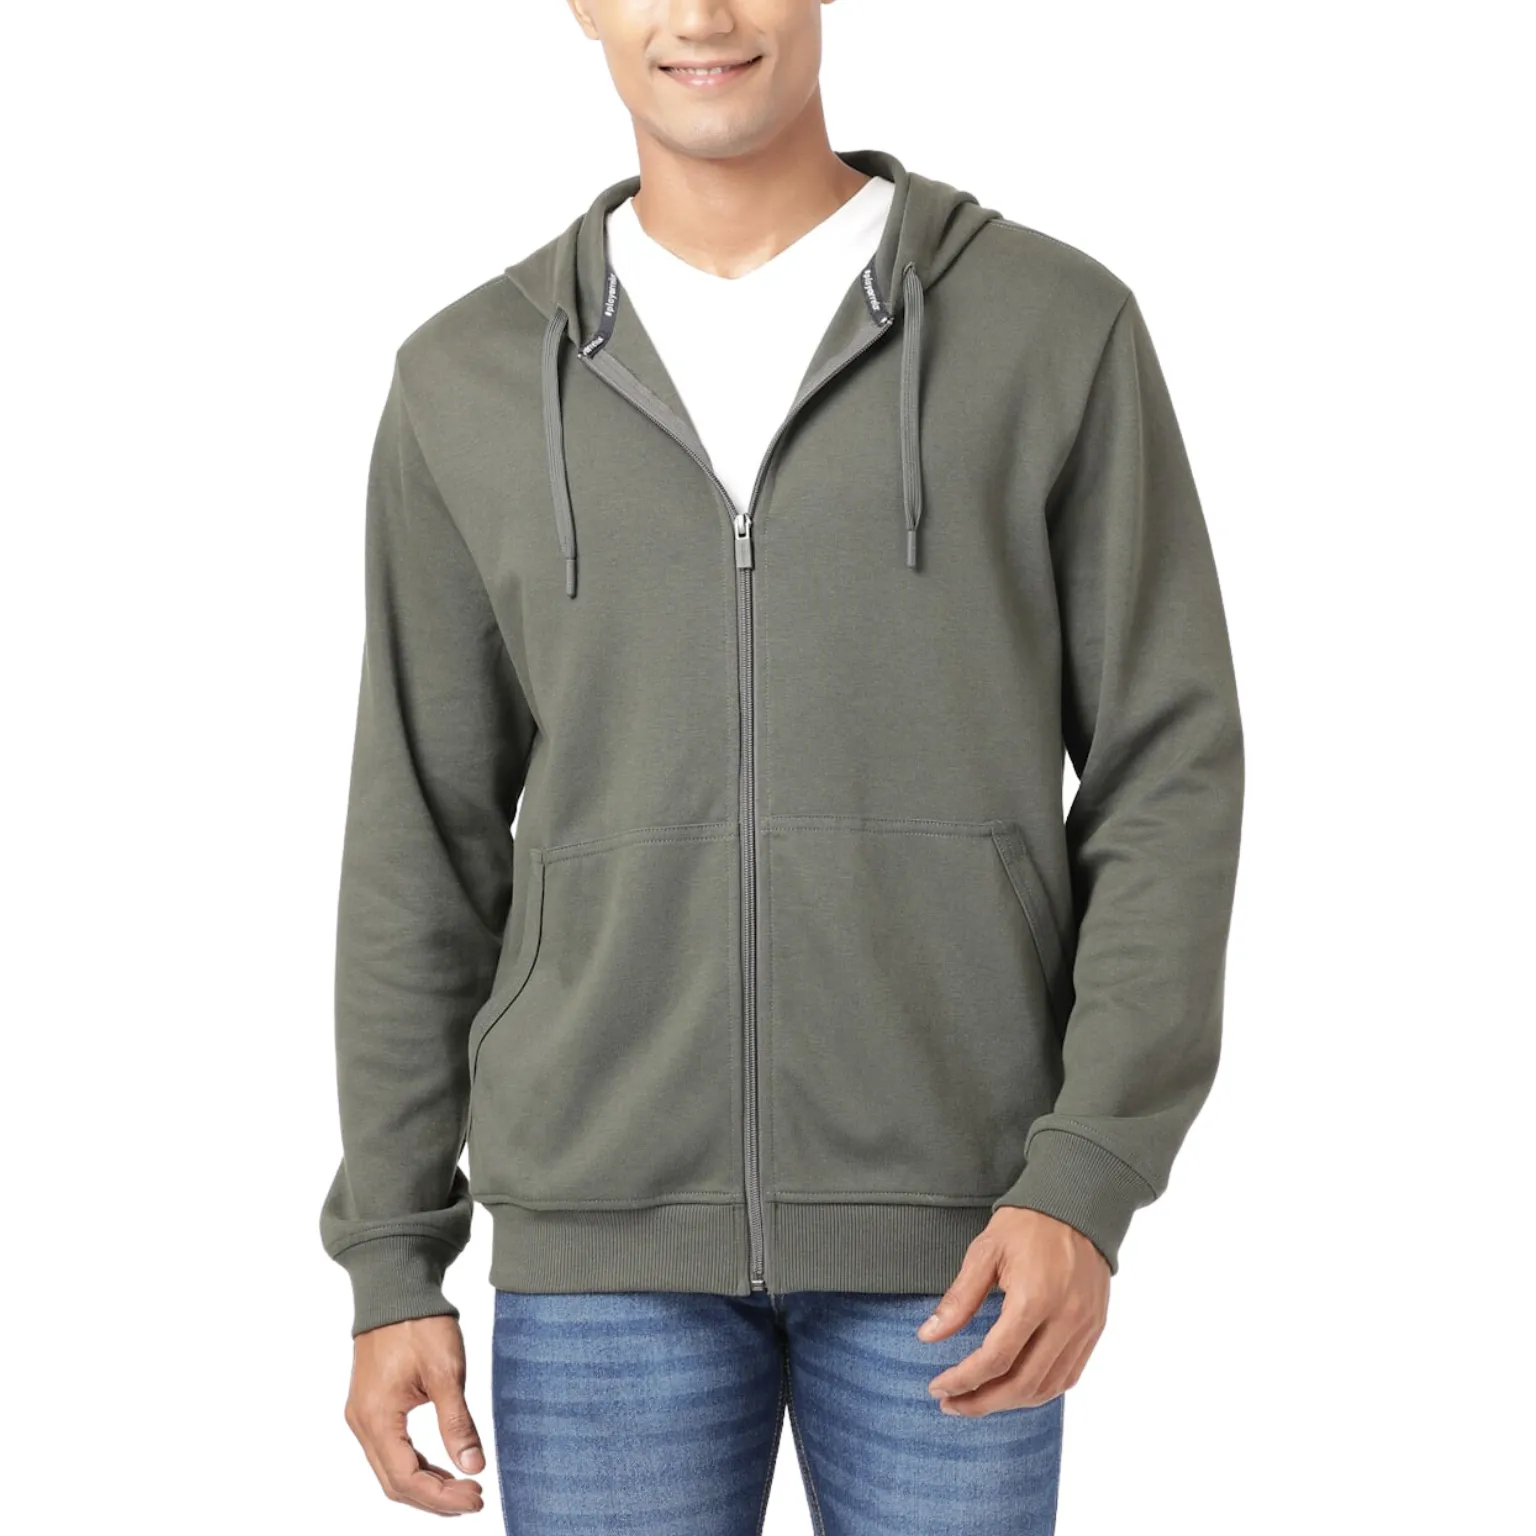 Hooded Jacket manufacturing with superior quality